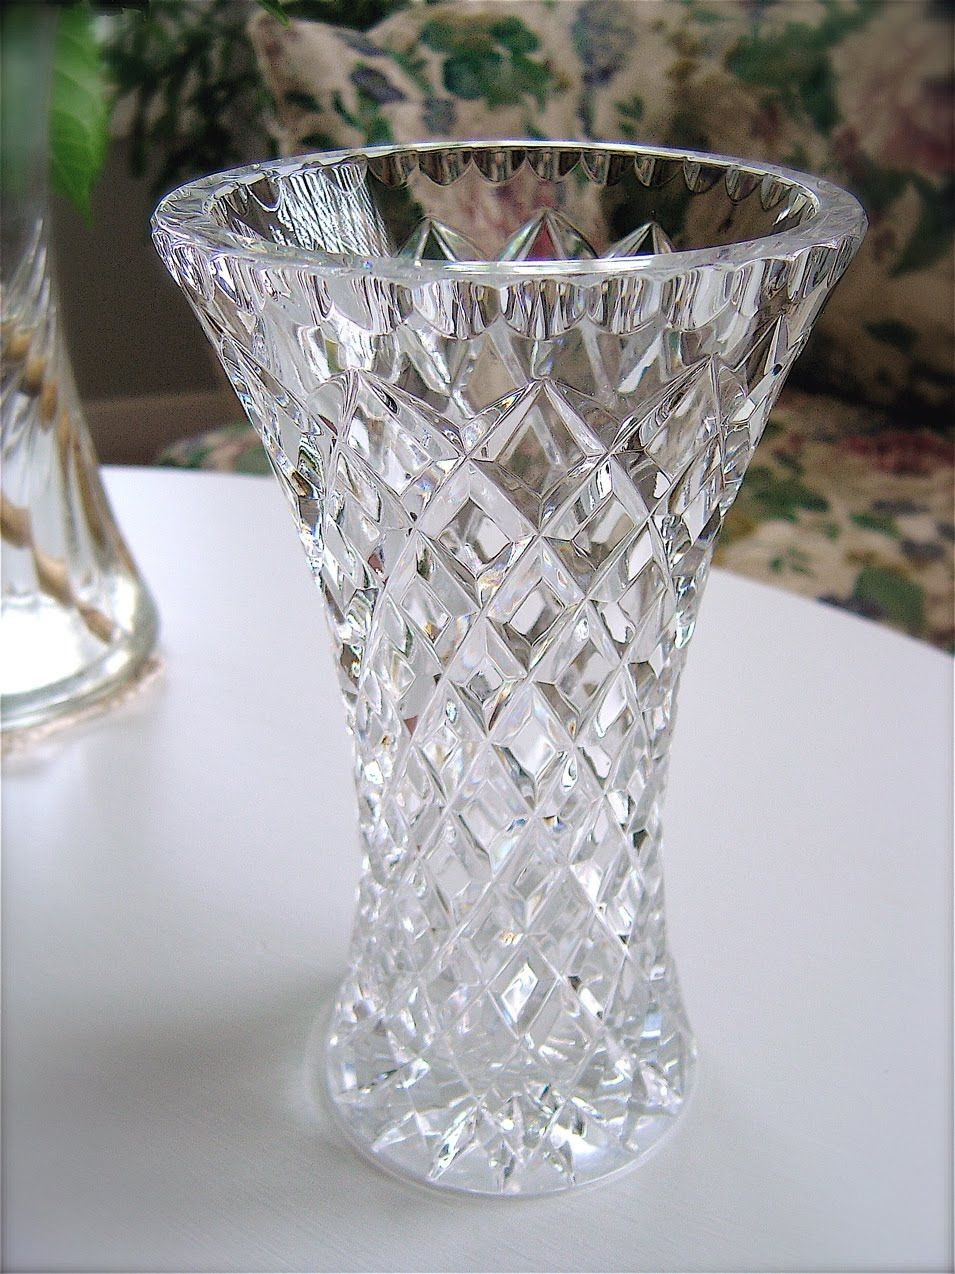 13 Popular Heavy Cut Glass Vase 2024 free download heavy cut glass vase of crystal vases for sale vase pinterest crystal vase and crystals in 74547ff5034c00424f36cfbda4cb6c74